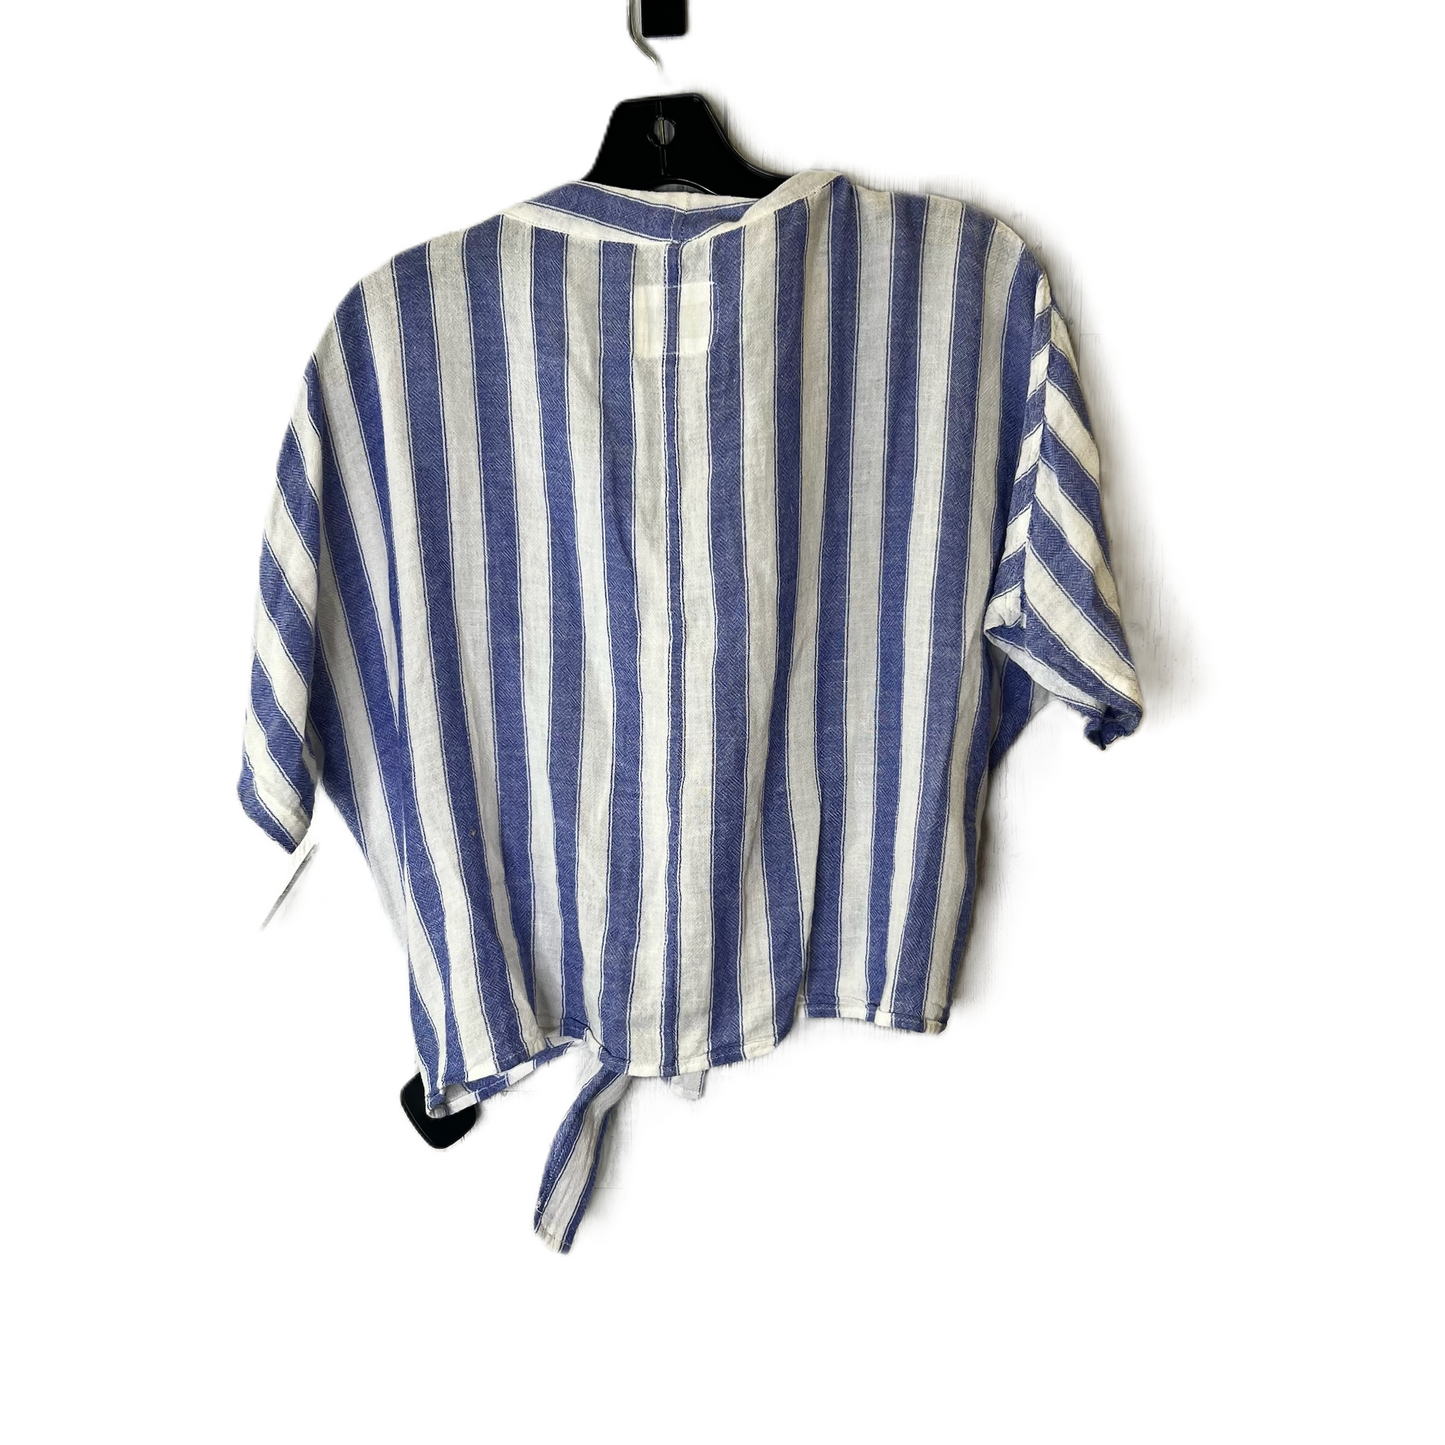 Striped Pattern Top Short Sleeve By Rails, Size: S